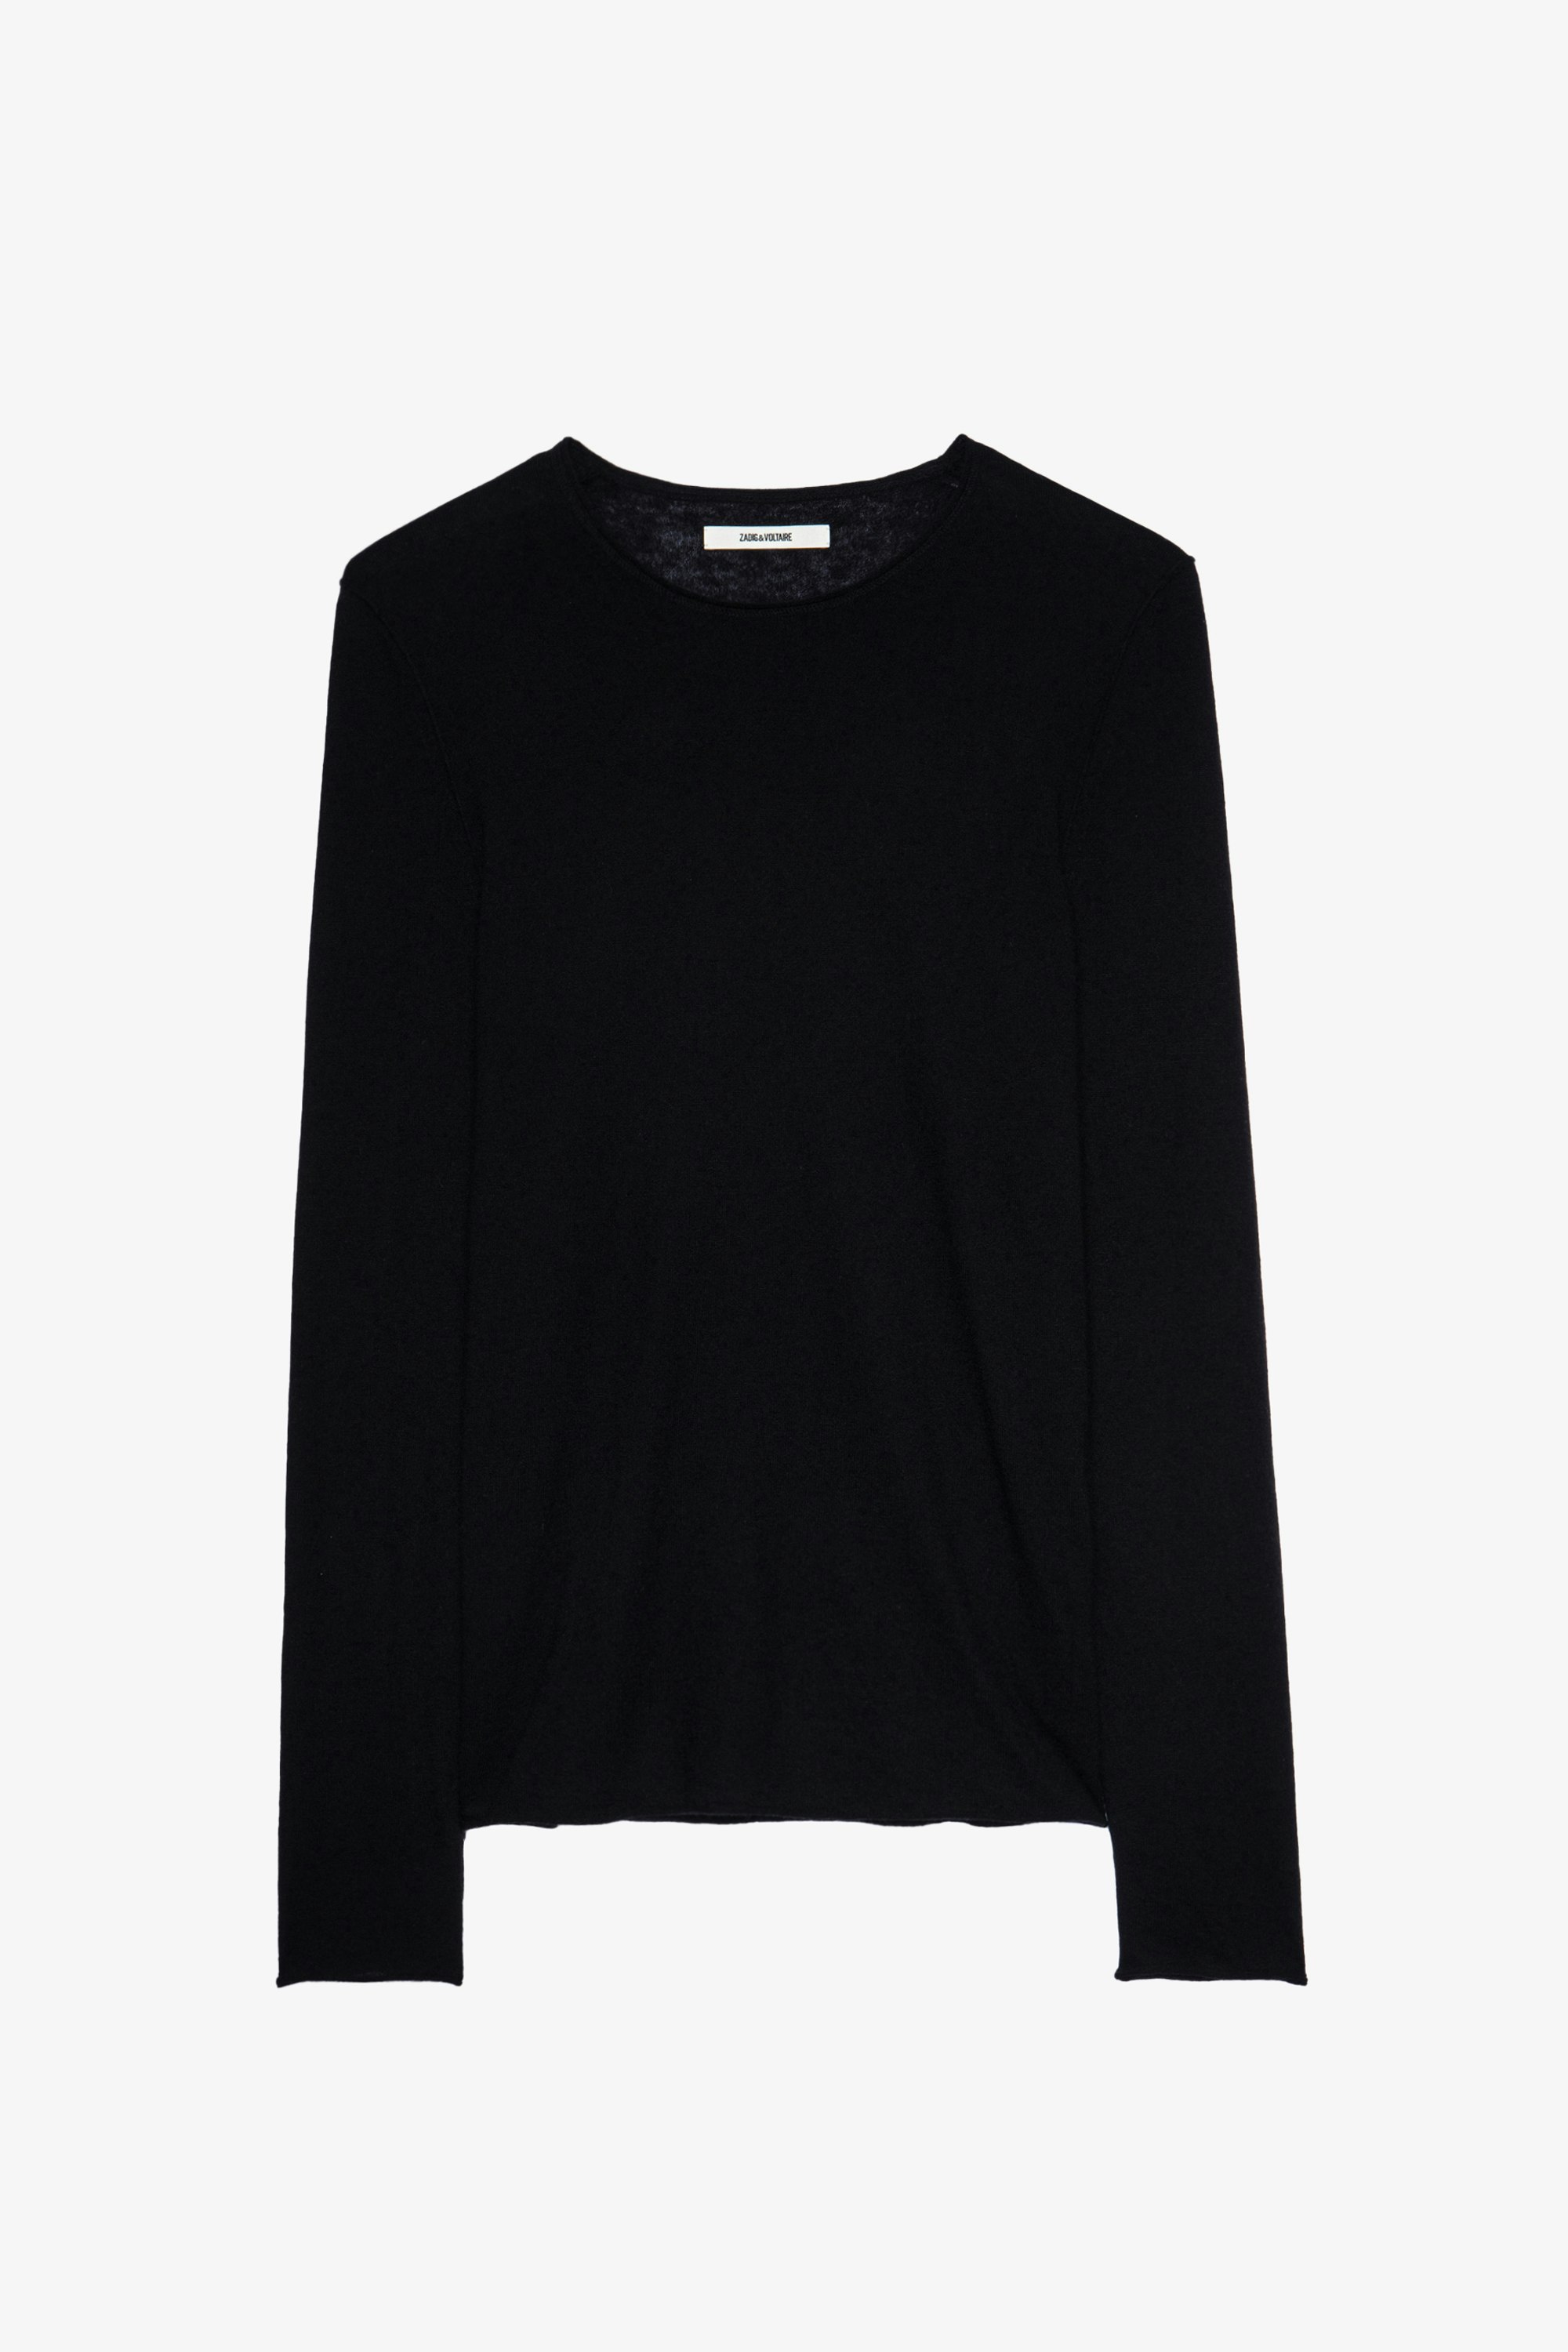 Teiss Cachemire Sweater - Men’s black feather cashmere sweater.